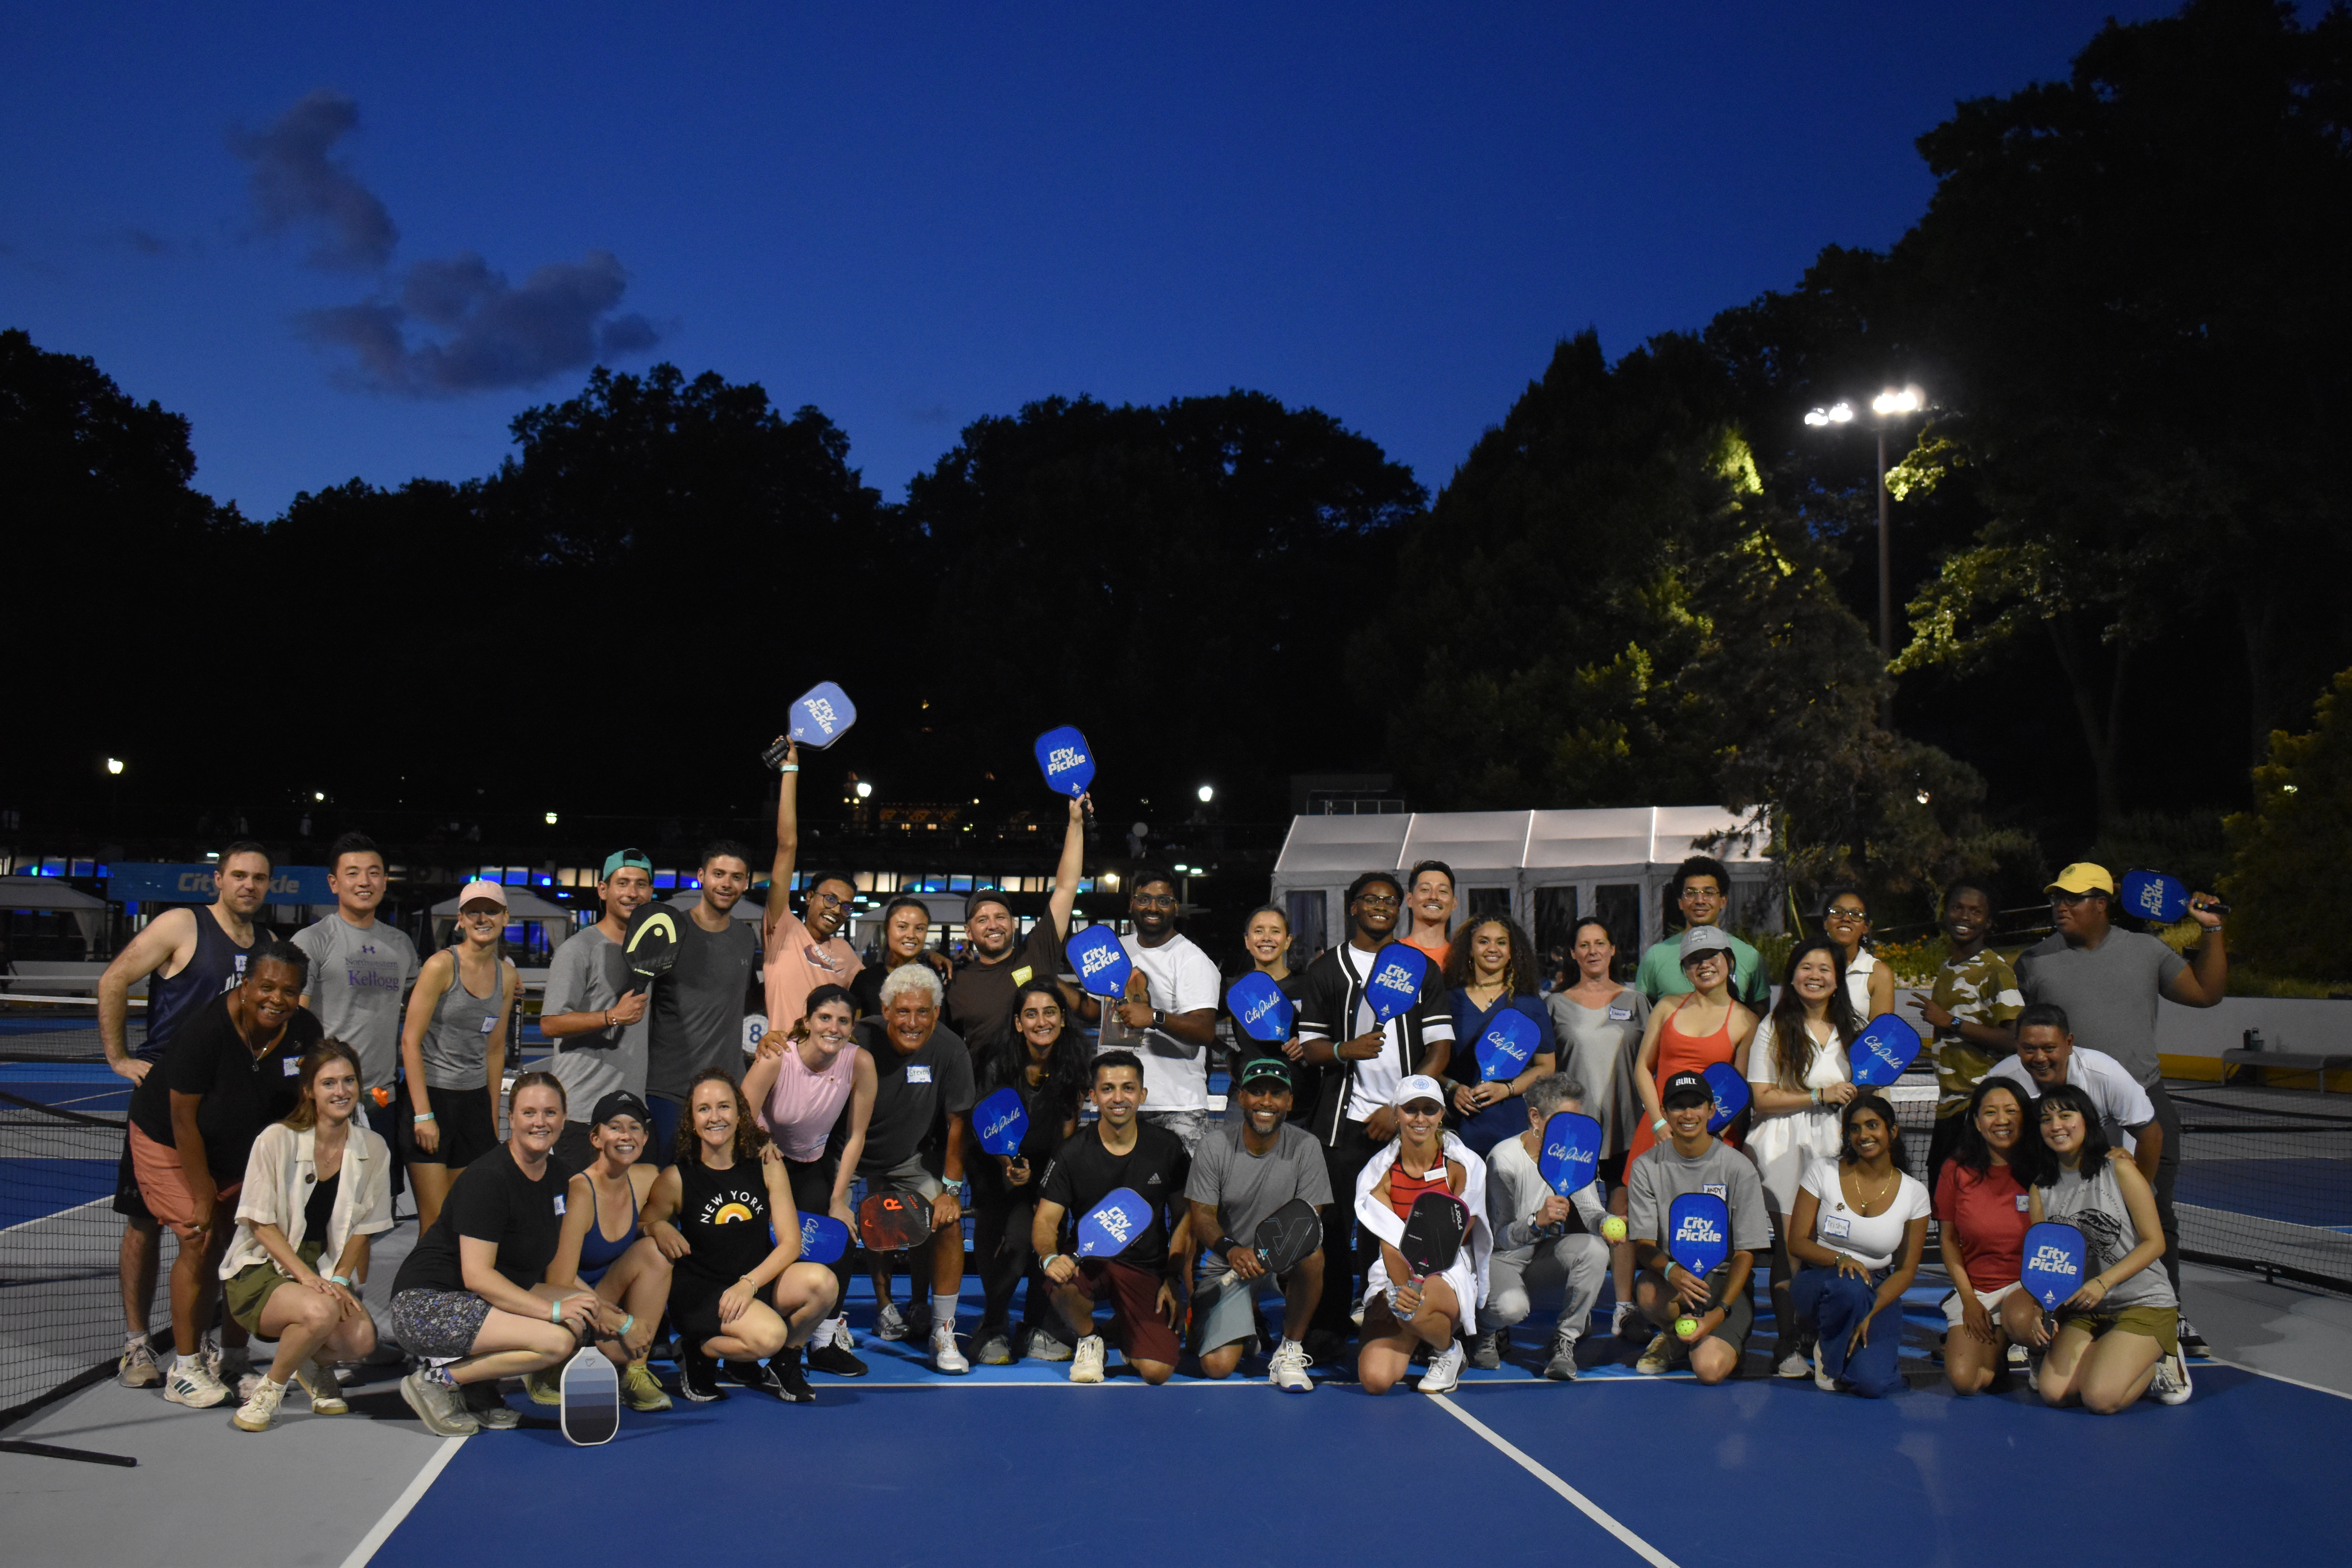 Recapping Pickleball for the Planet